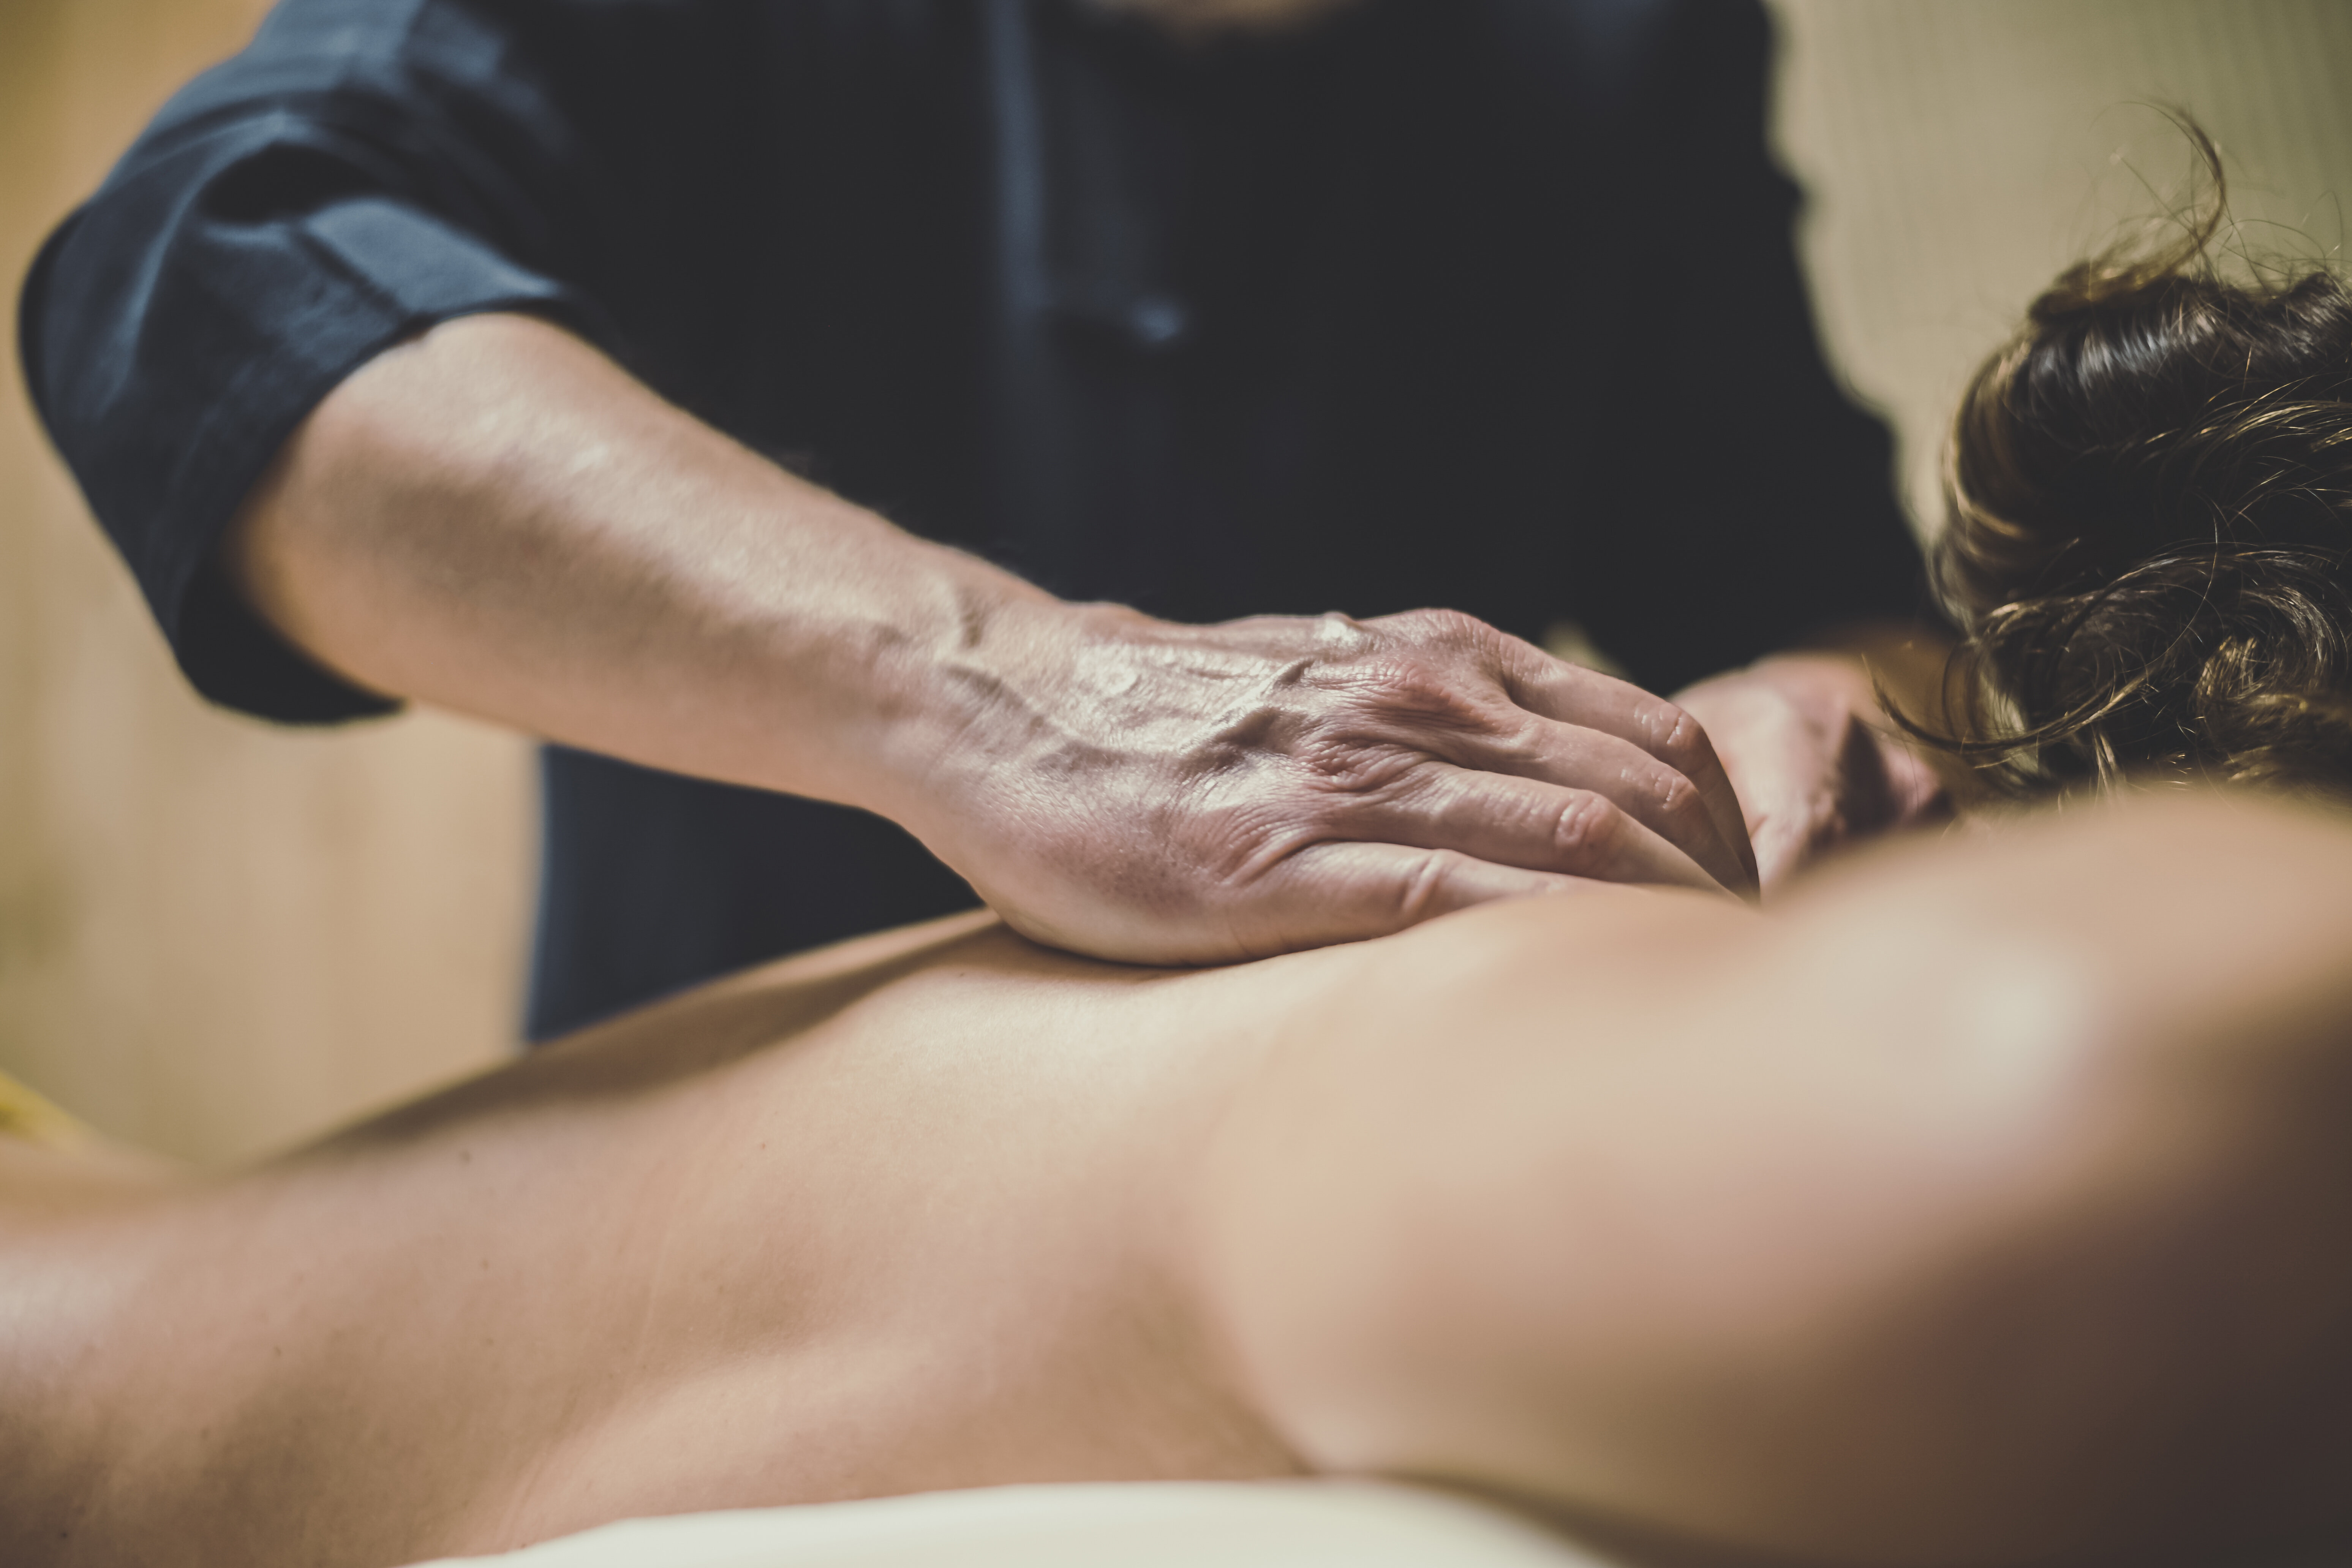 Happy Ending Massage My Experience As A Middle-Aged Woman HuffPost HuffPost Personal photo